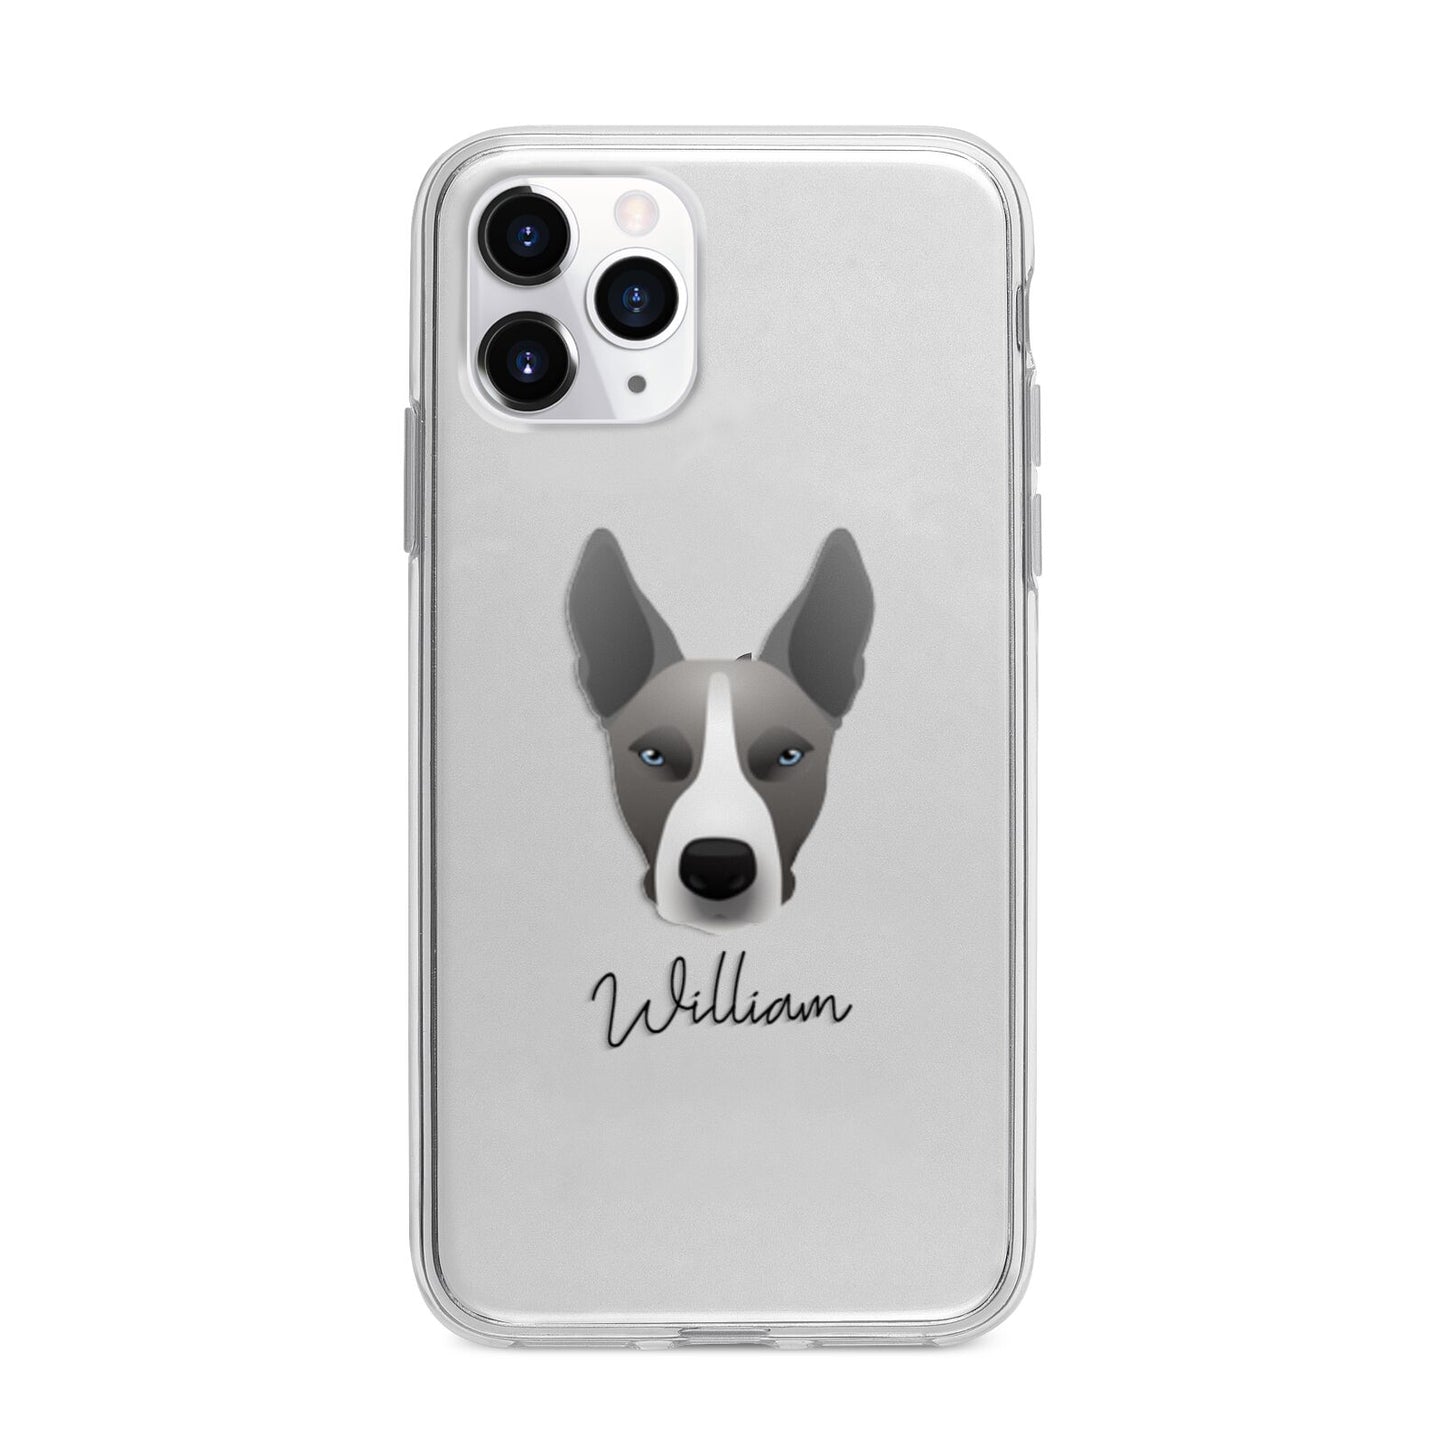 Pitsky Personalised Apple iPhone 11 Pro in Silver with Bumper Case